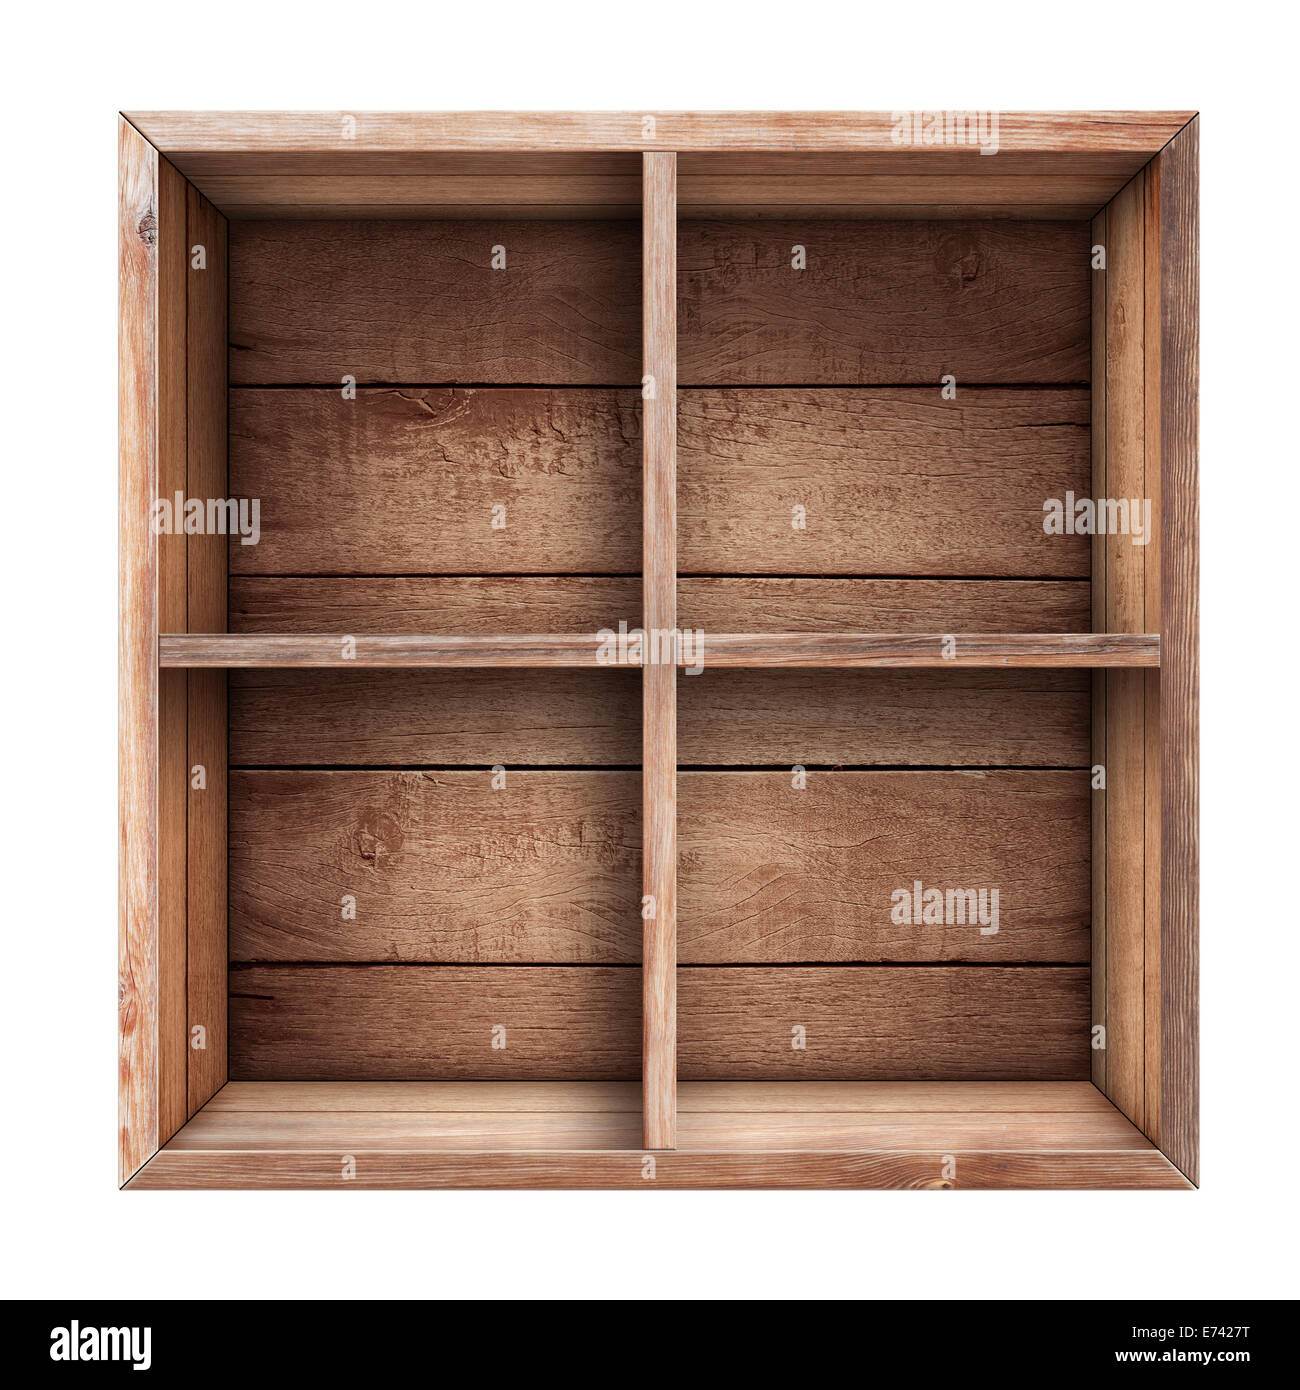 wooden box, shelf or crate isolated on white Stock Photo